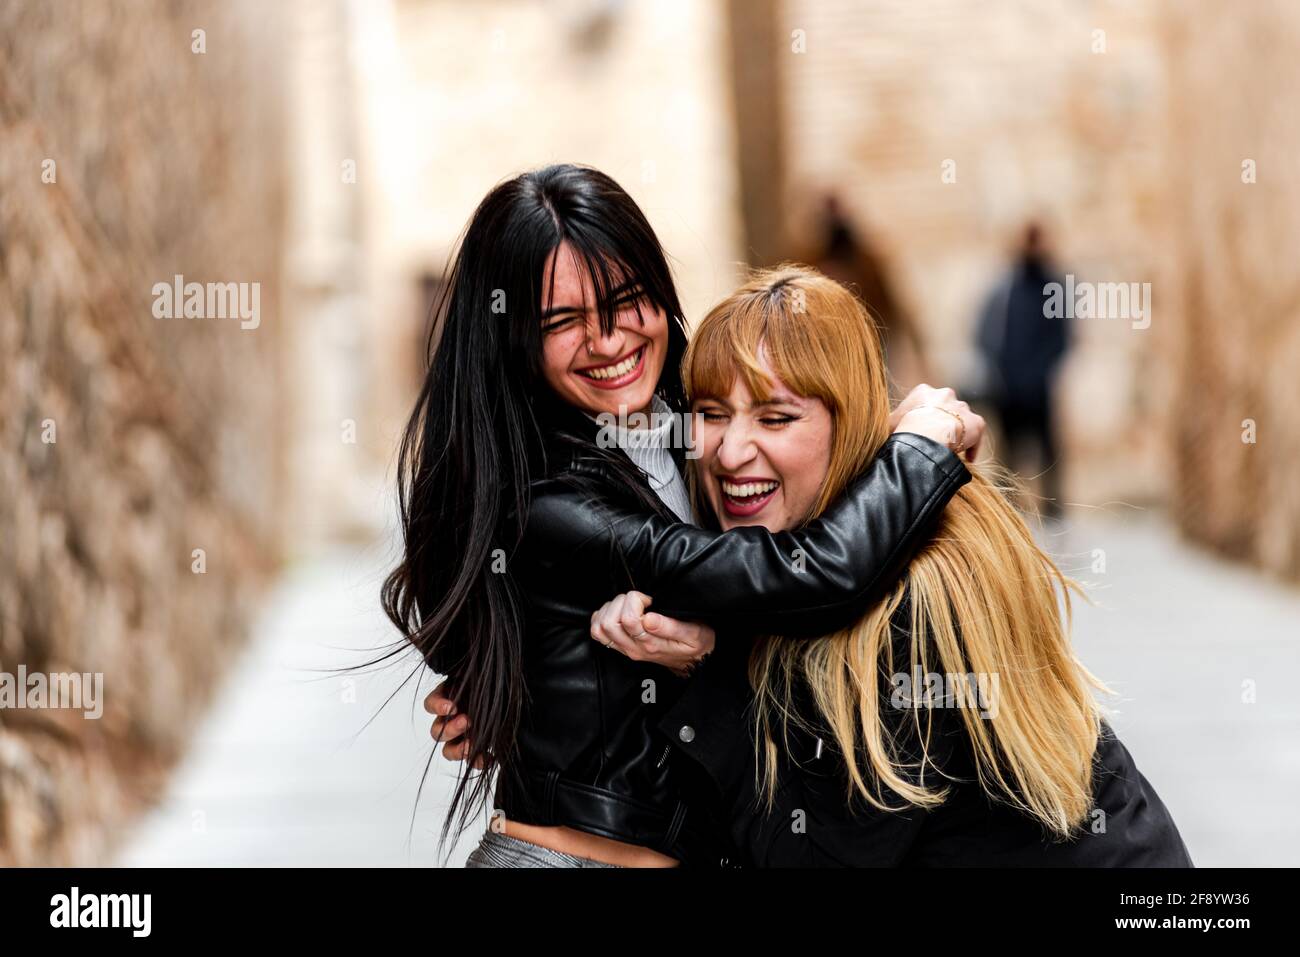 Blonde and brunette woman hugging each other happily. Stock Photo